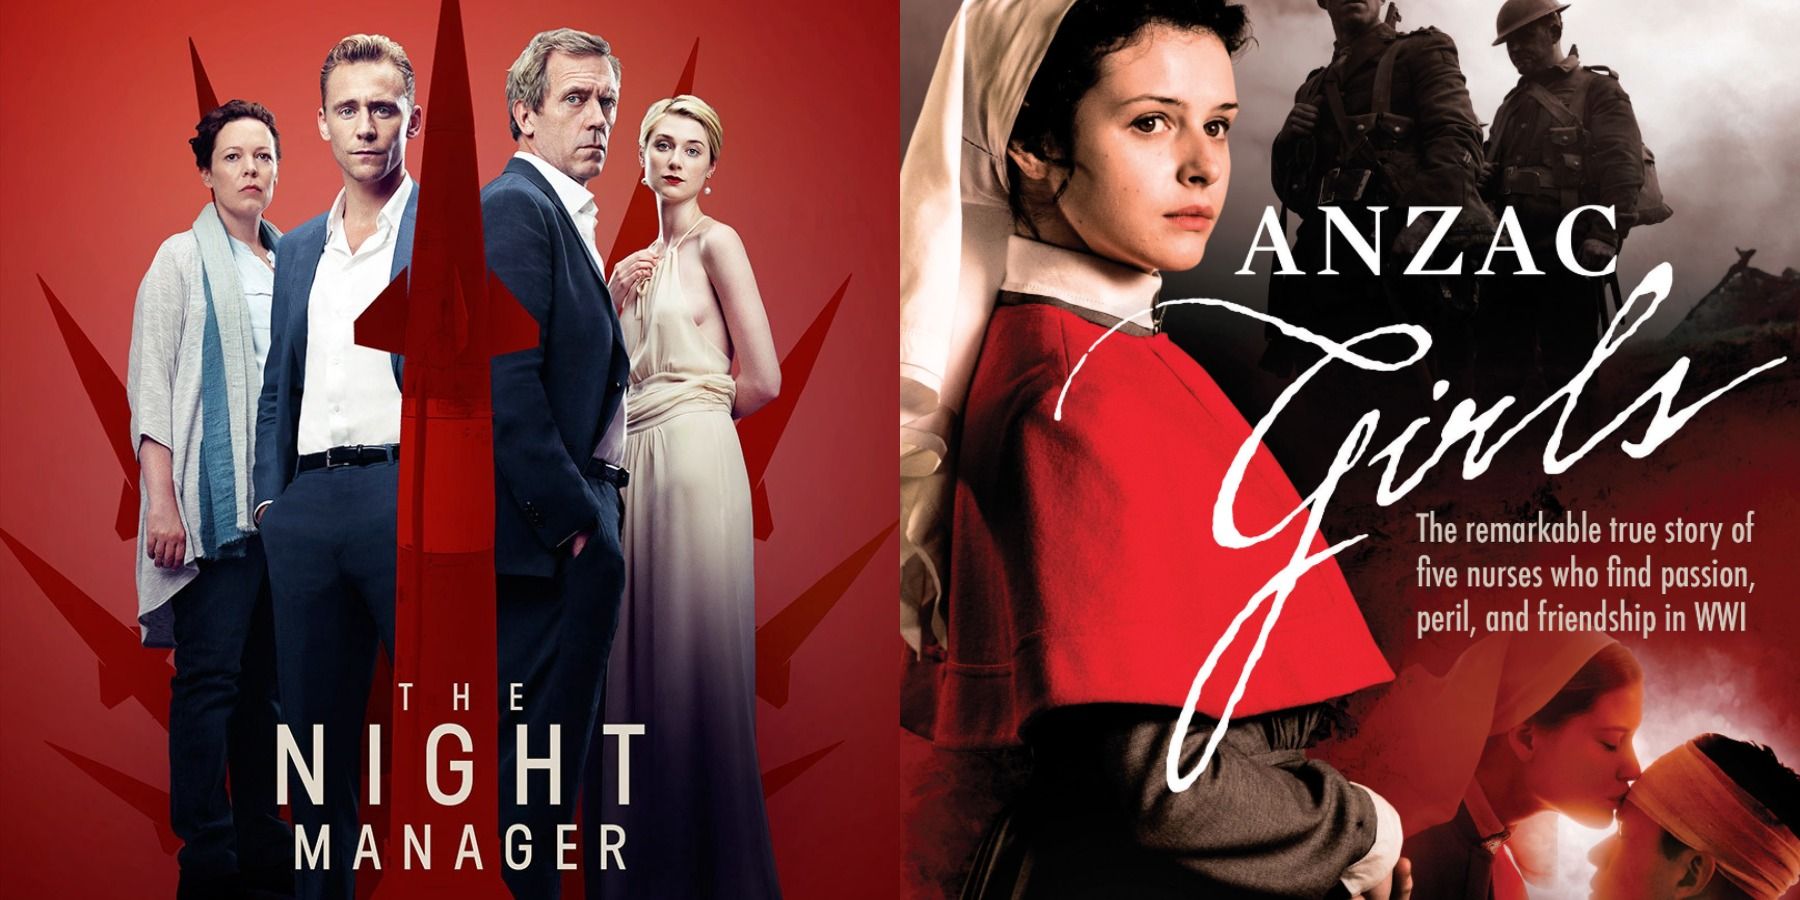 Miniseries The Night Manager and the Anzac Girls